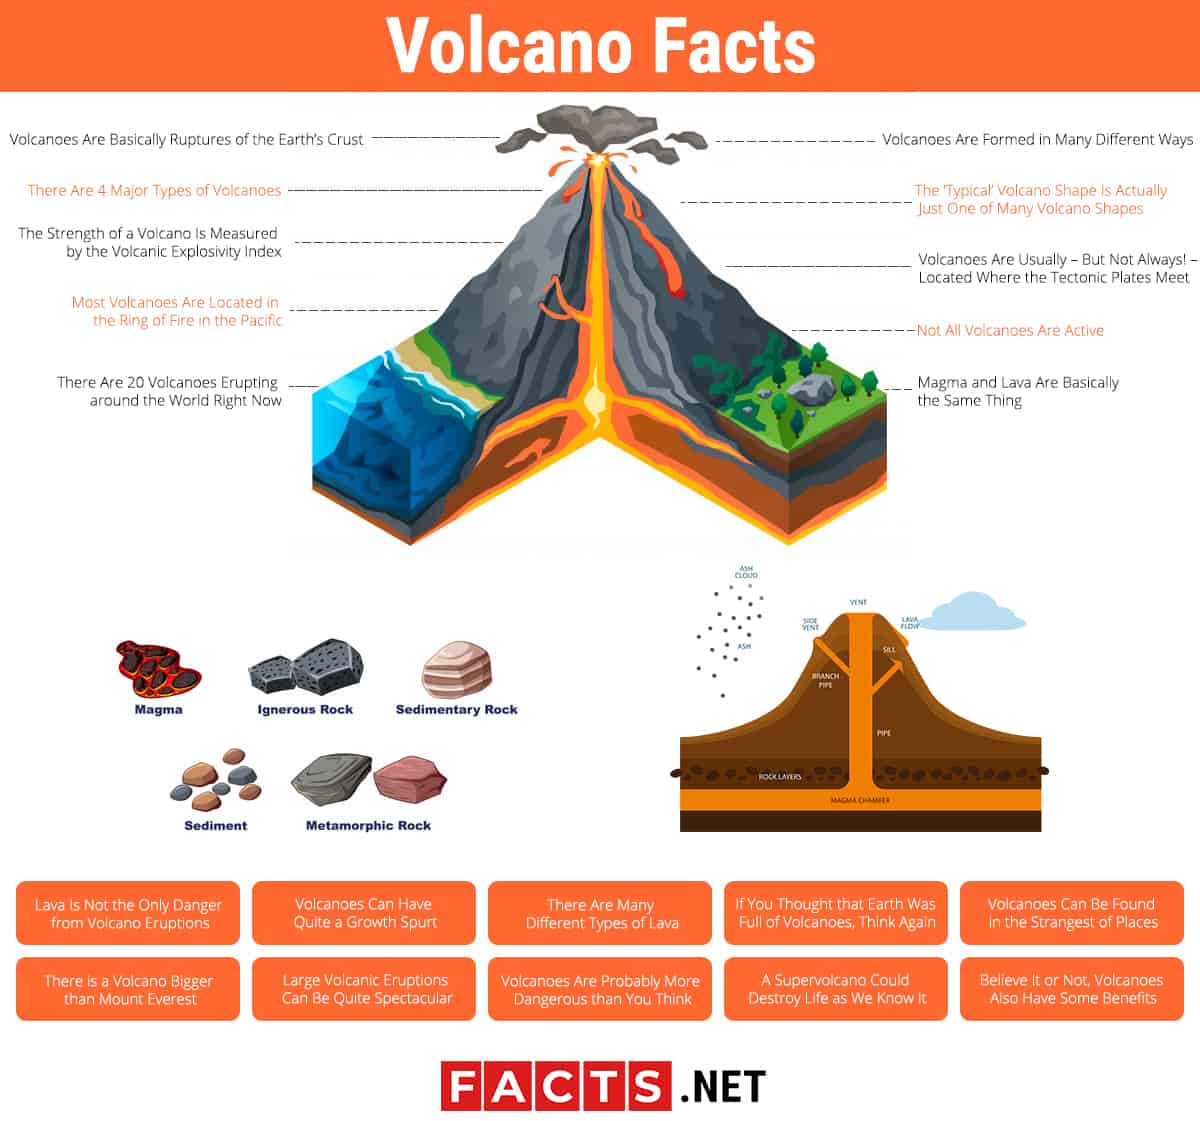 10-interesting-facts-about-volcanoes-and-earthquakes-the-earth-images